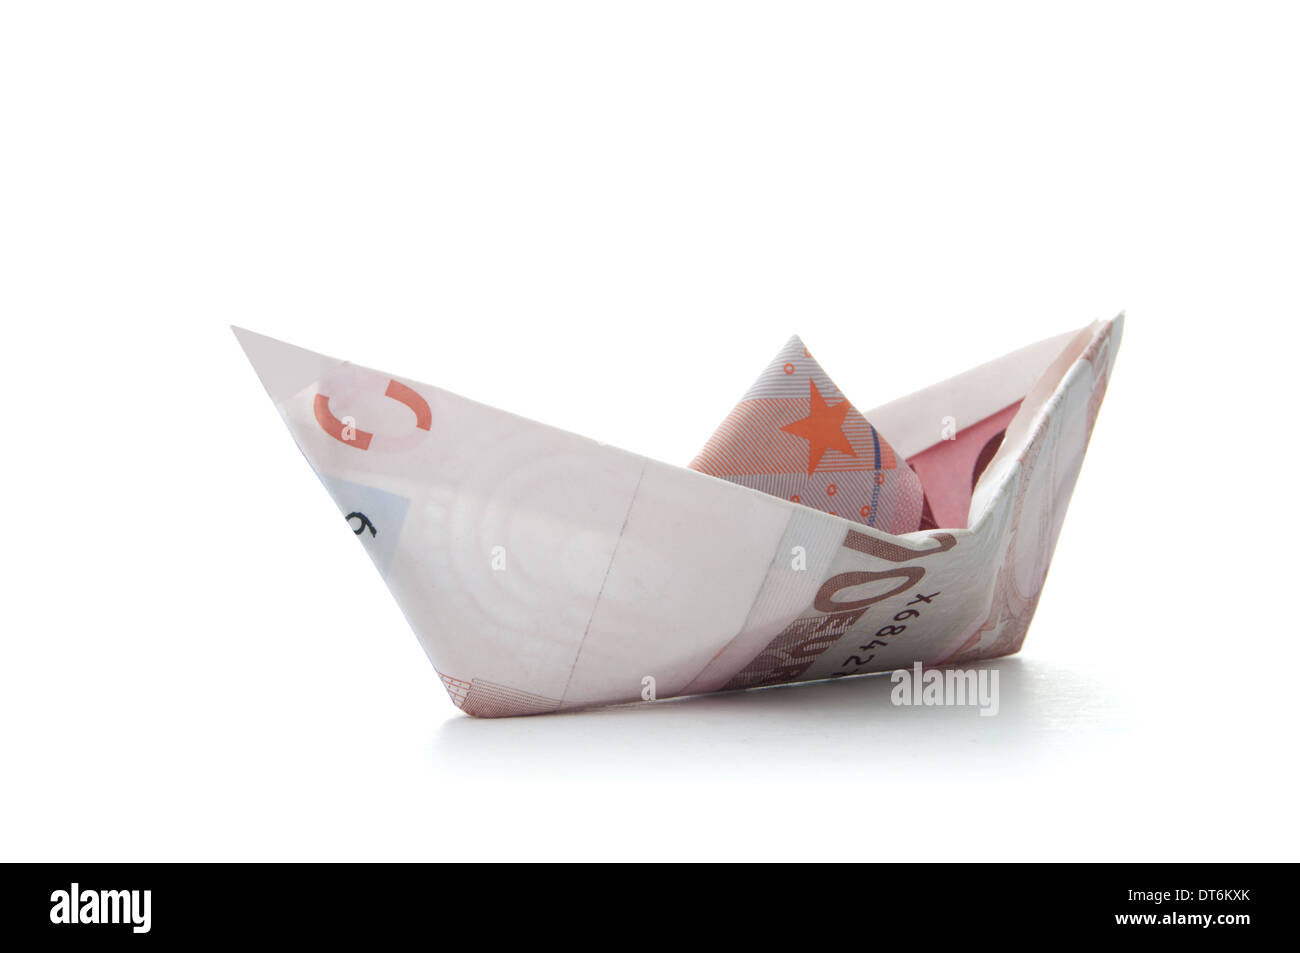 Euro banknote paper boat Stock Photo